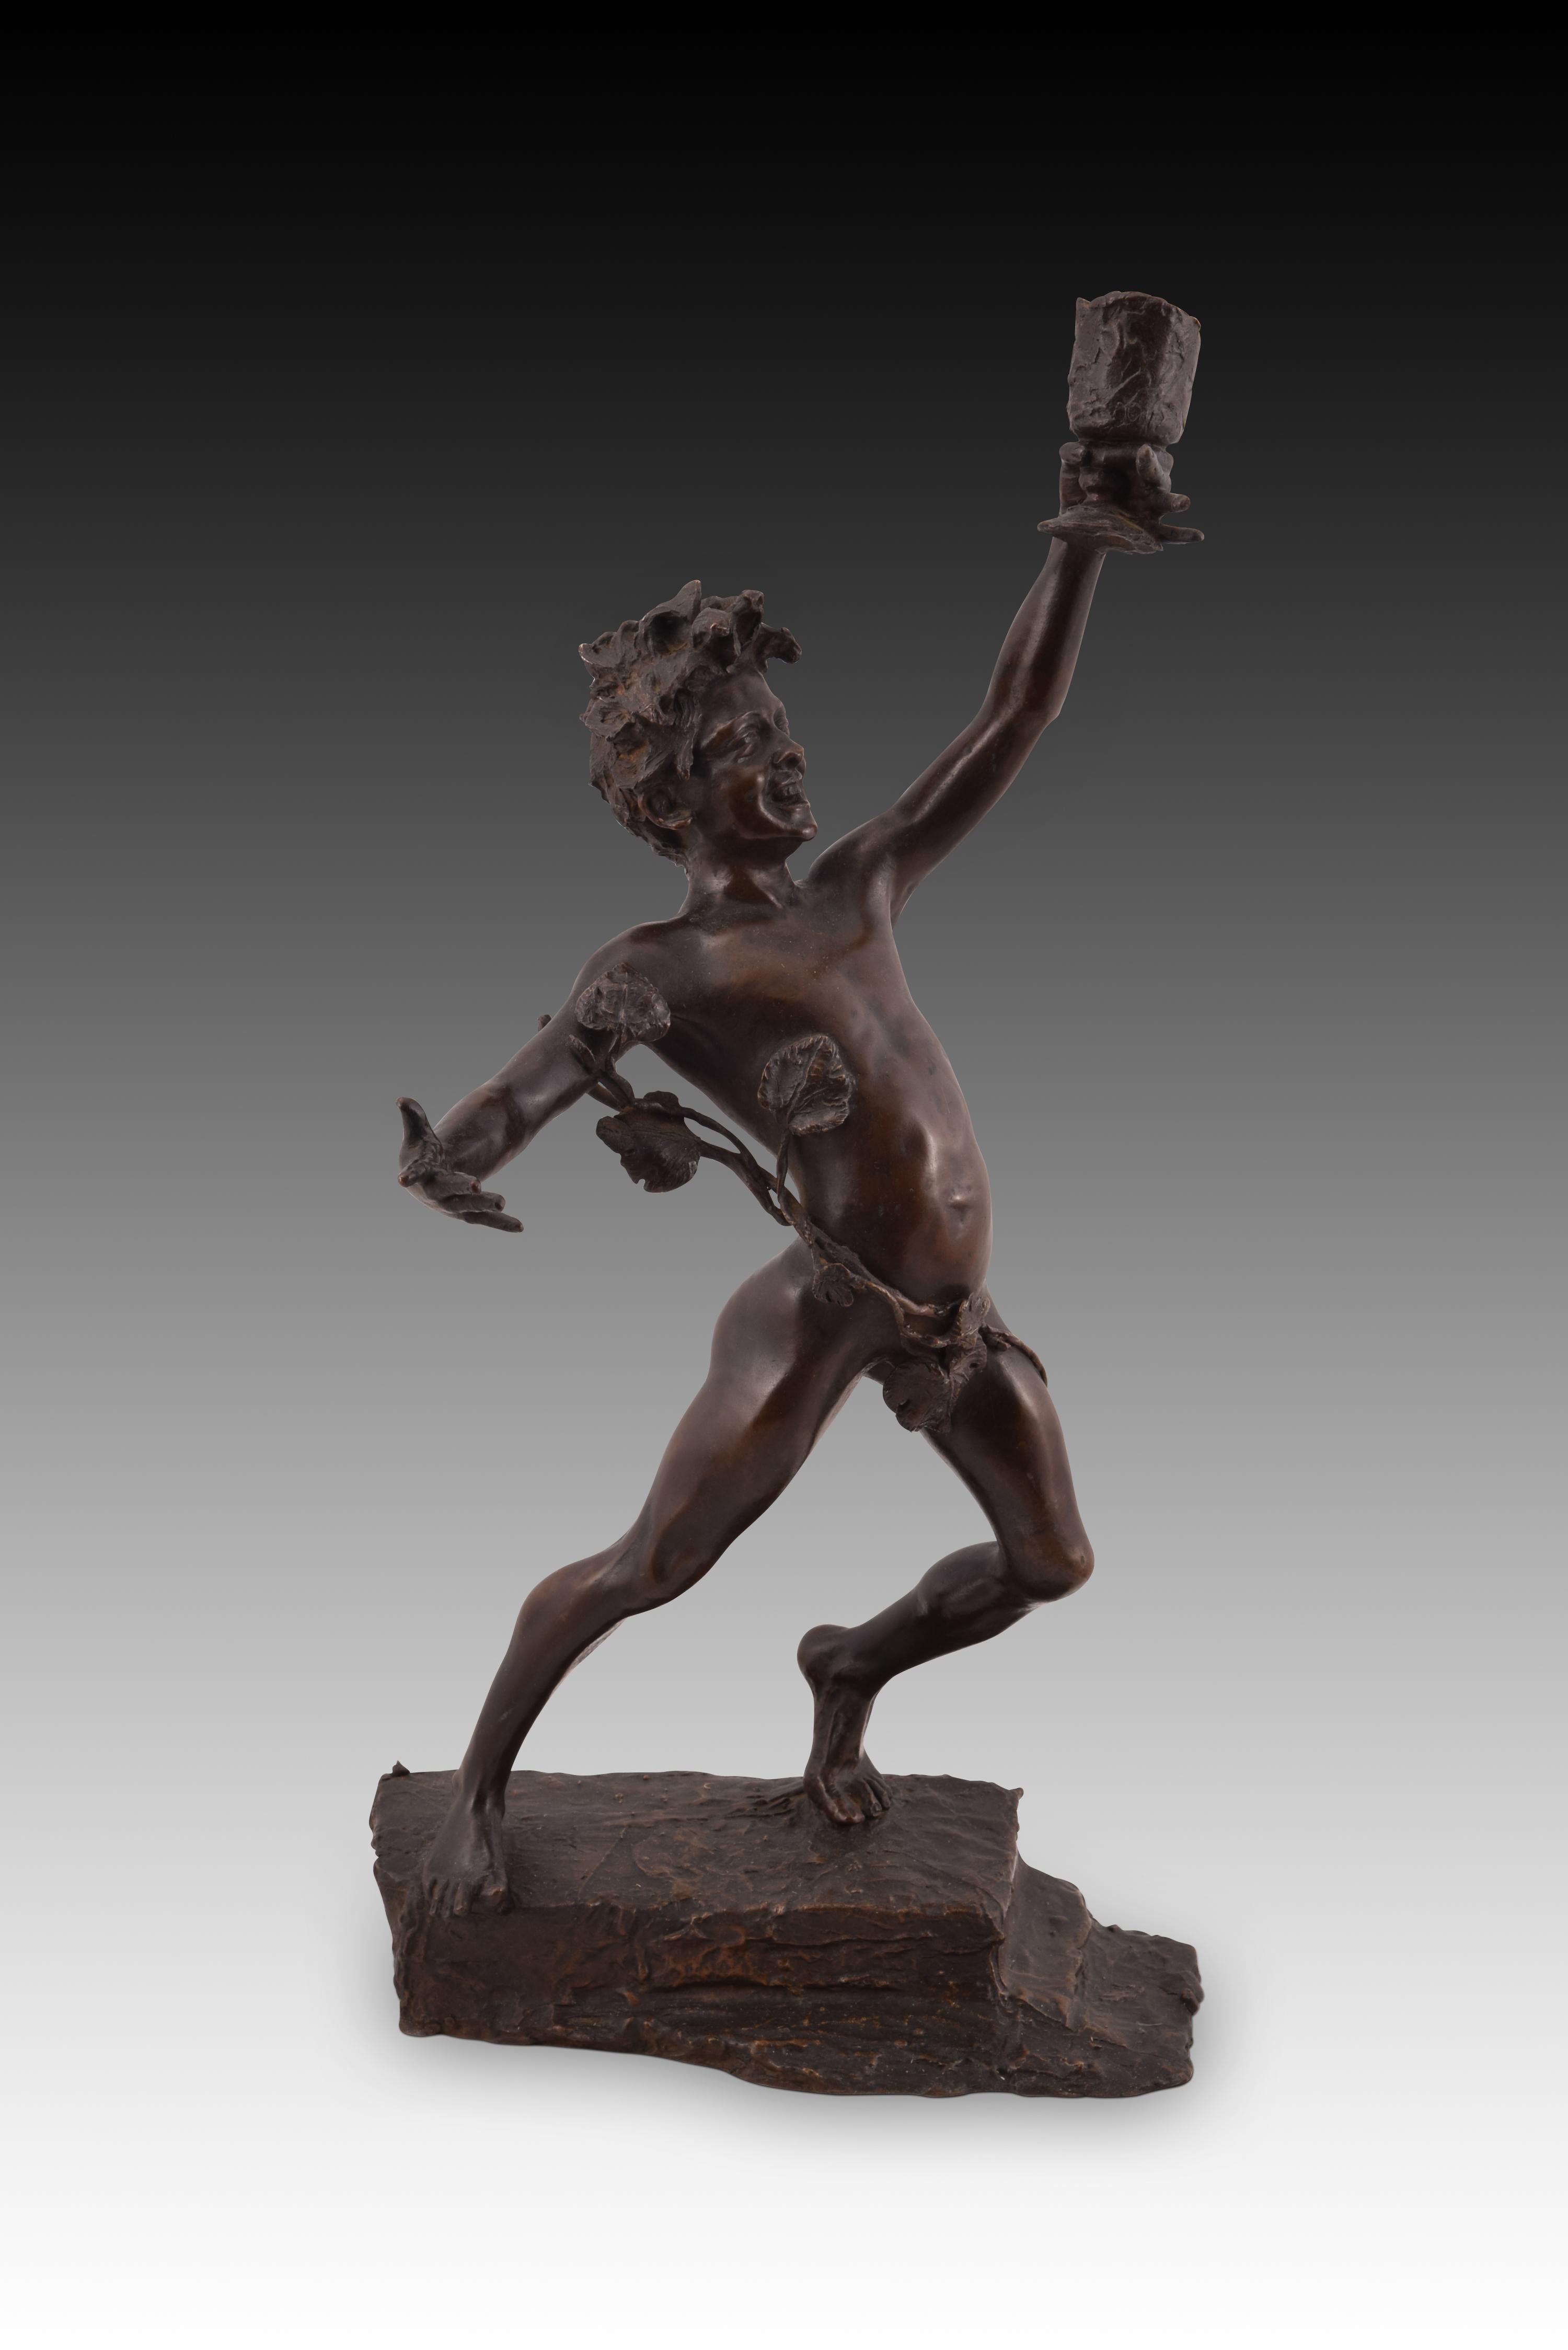 Bacchus. Bronze. RENDA, Giuseppe (1859/92-1939).
 Bronze figure with a rectangular base resembling rocks that shows a figure of a half-naked young man, with leaves and vine stems on his body and head, holding a glass high and in a happy attitude.